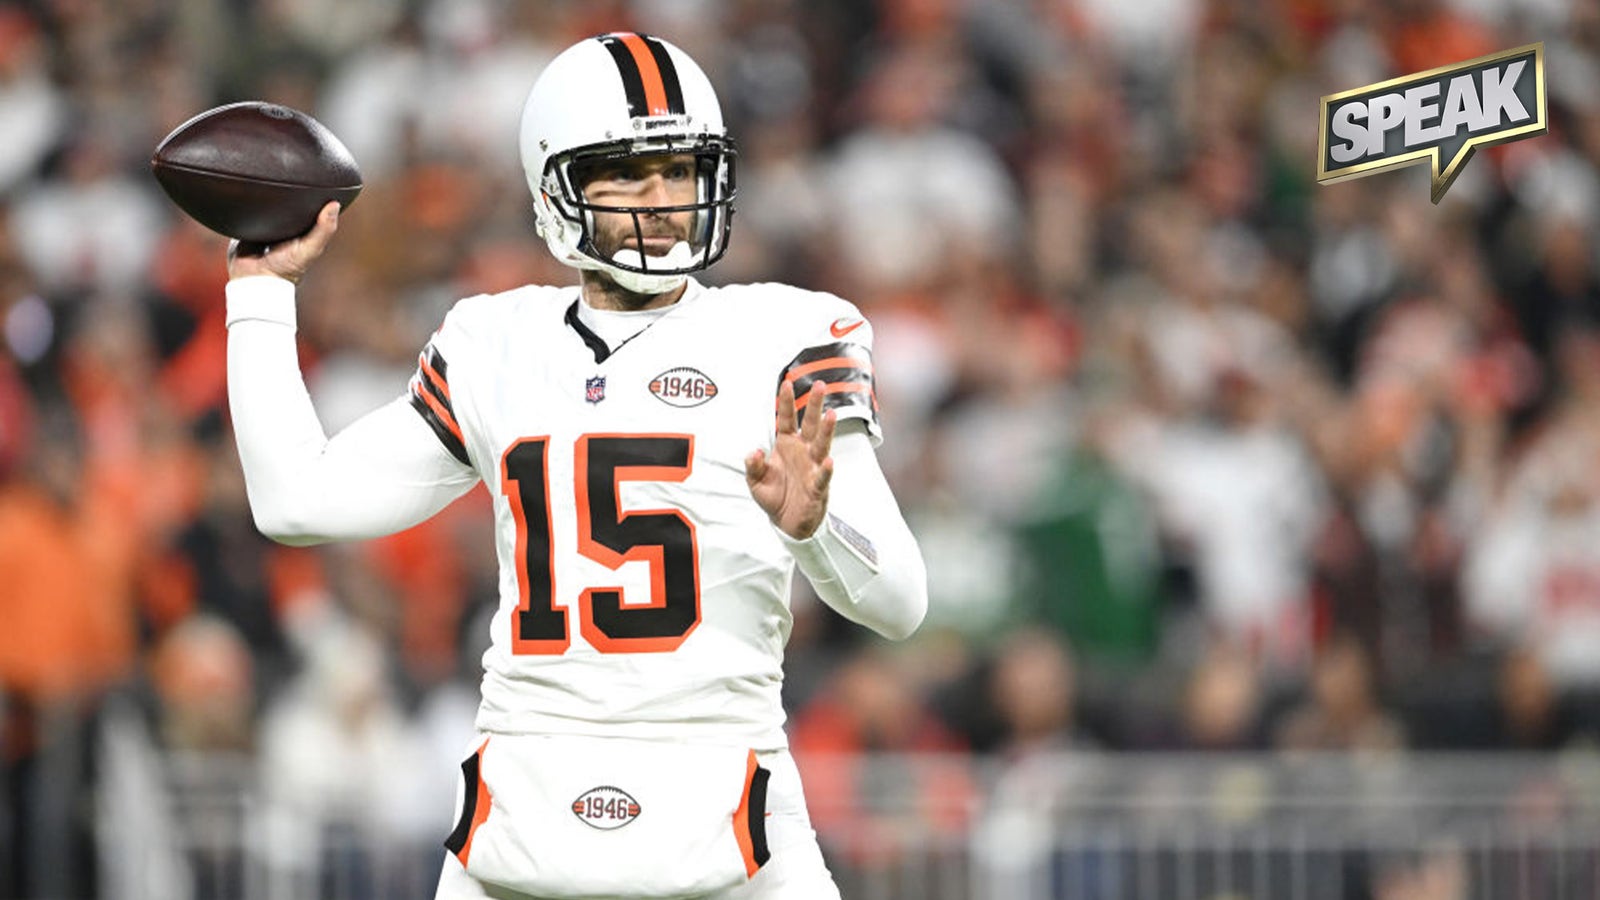 Should teams fear Joe Flacco, Browns heading into the playoffs?